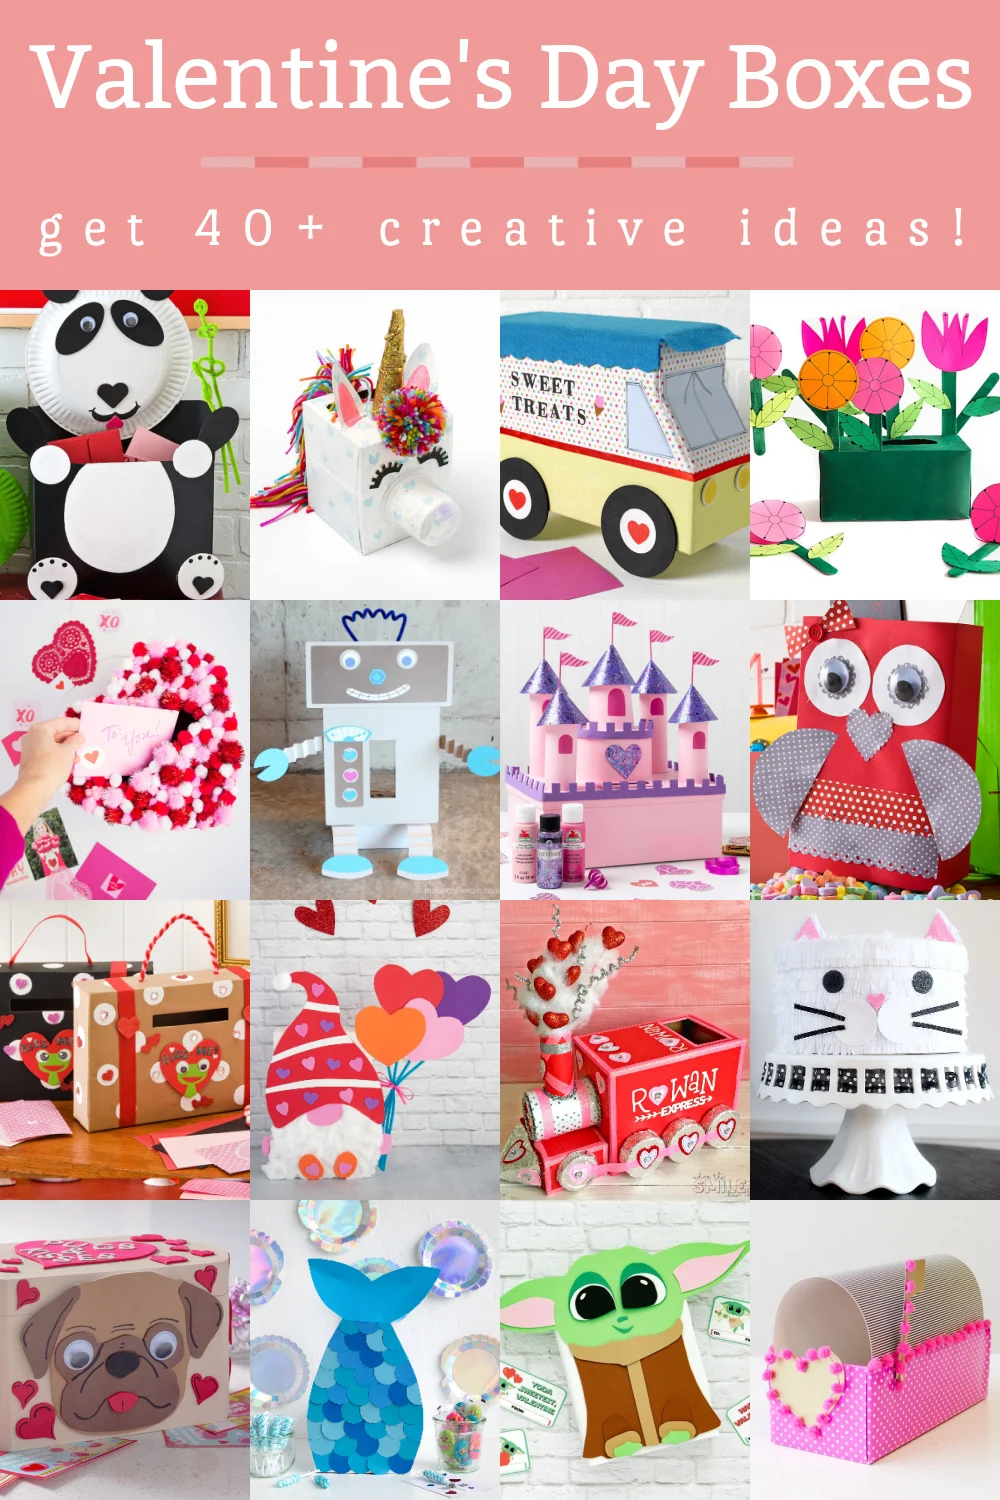 17 Cute Kids' Valentine's Day Cards - Class Exchange Boxed Cards